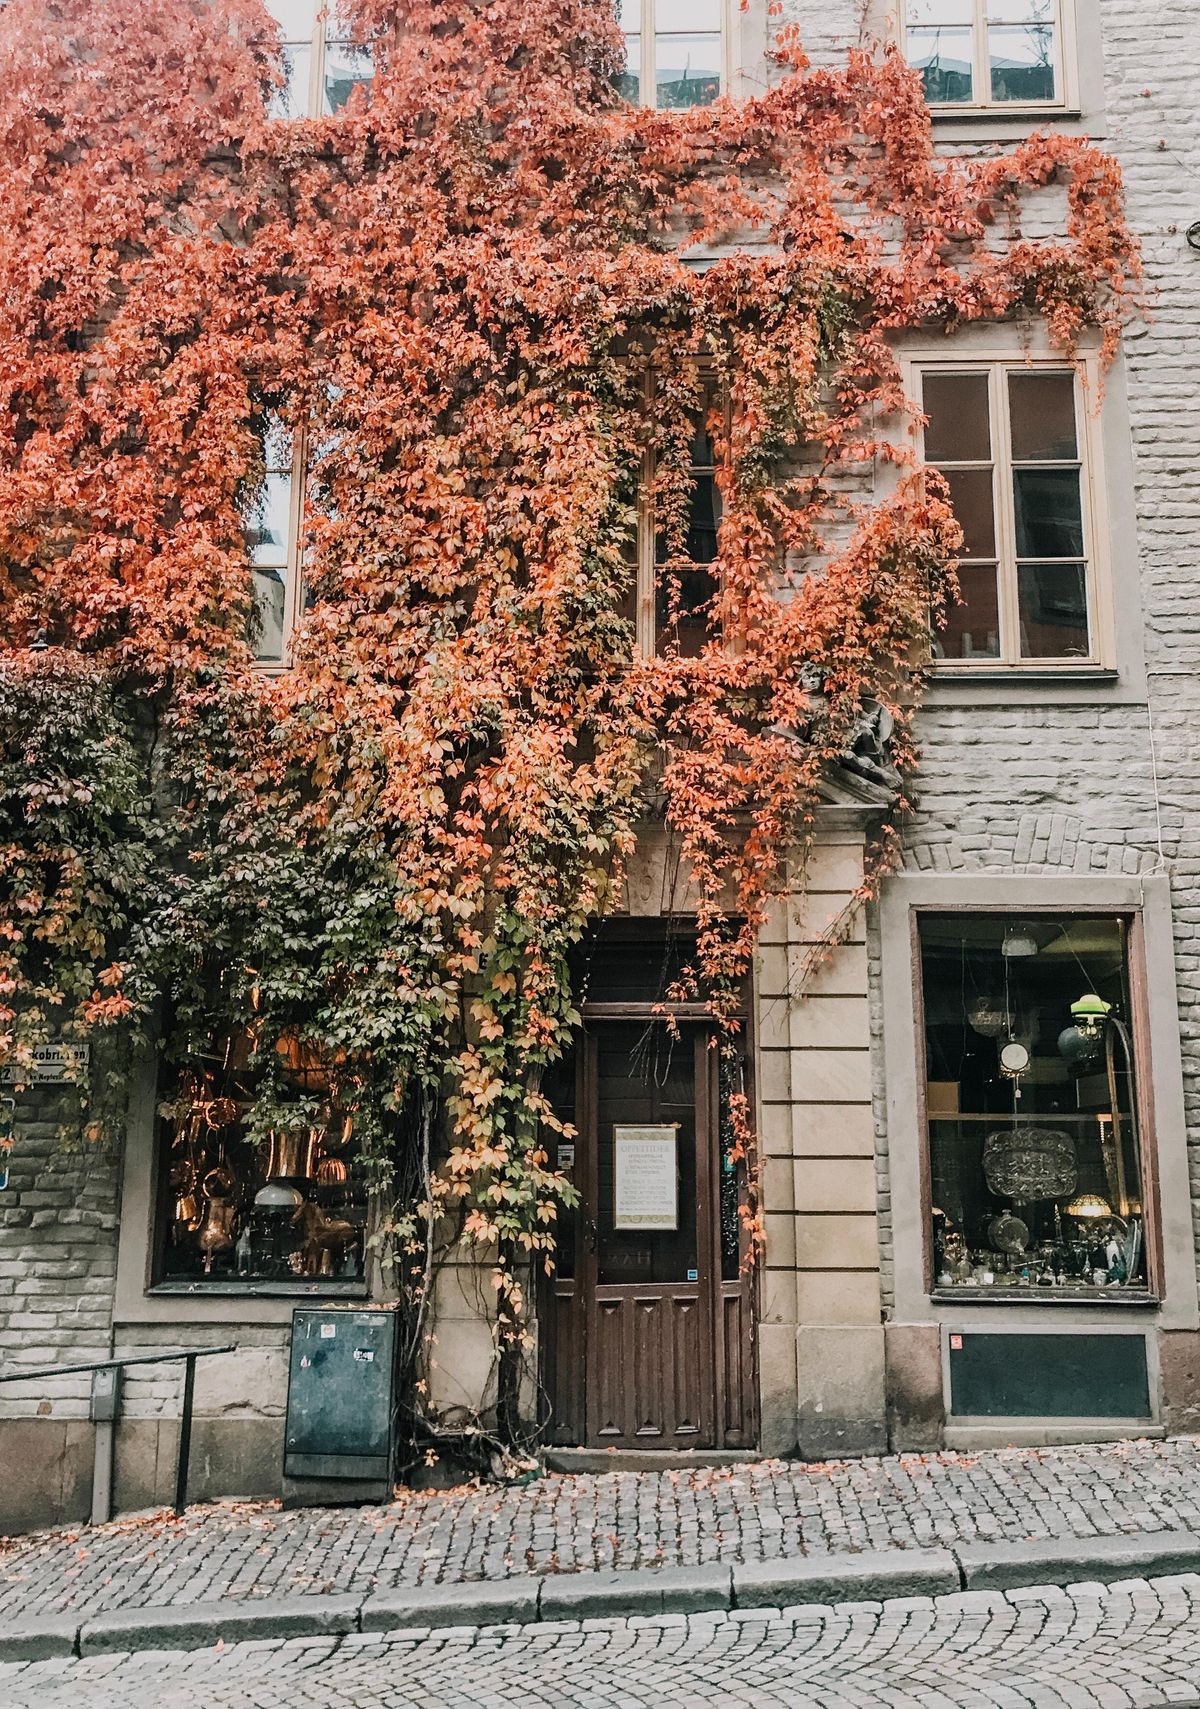 A building covered in fall leaves on a cobblestone street.